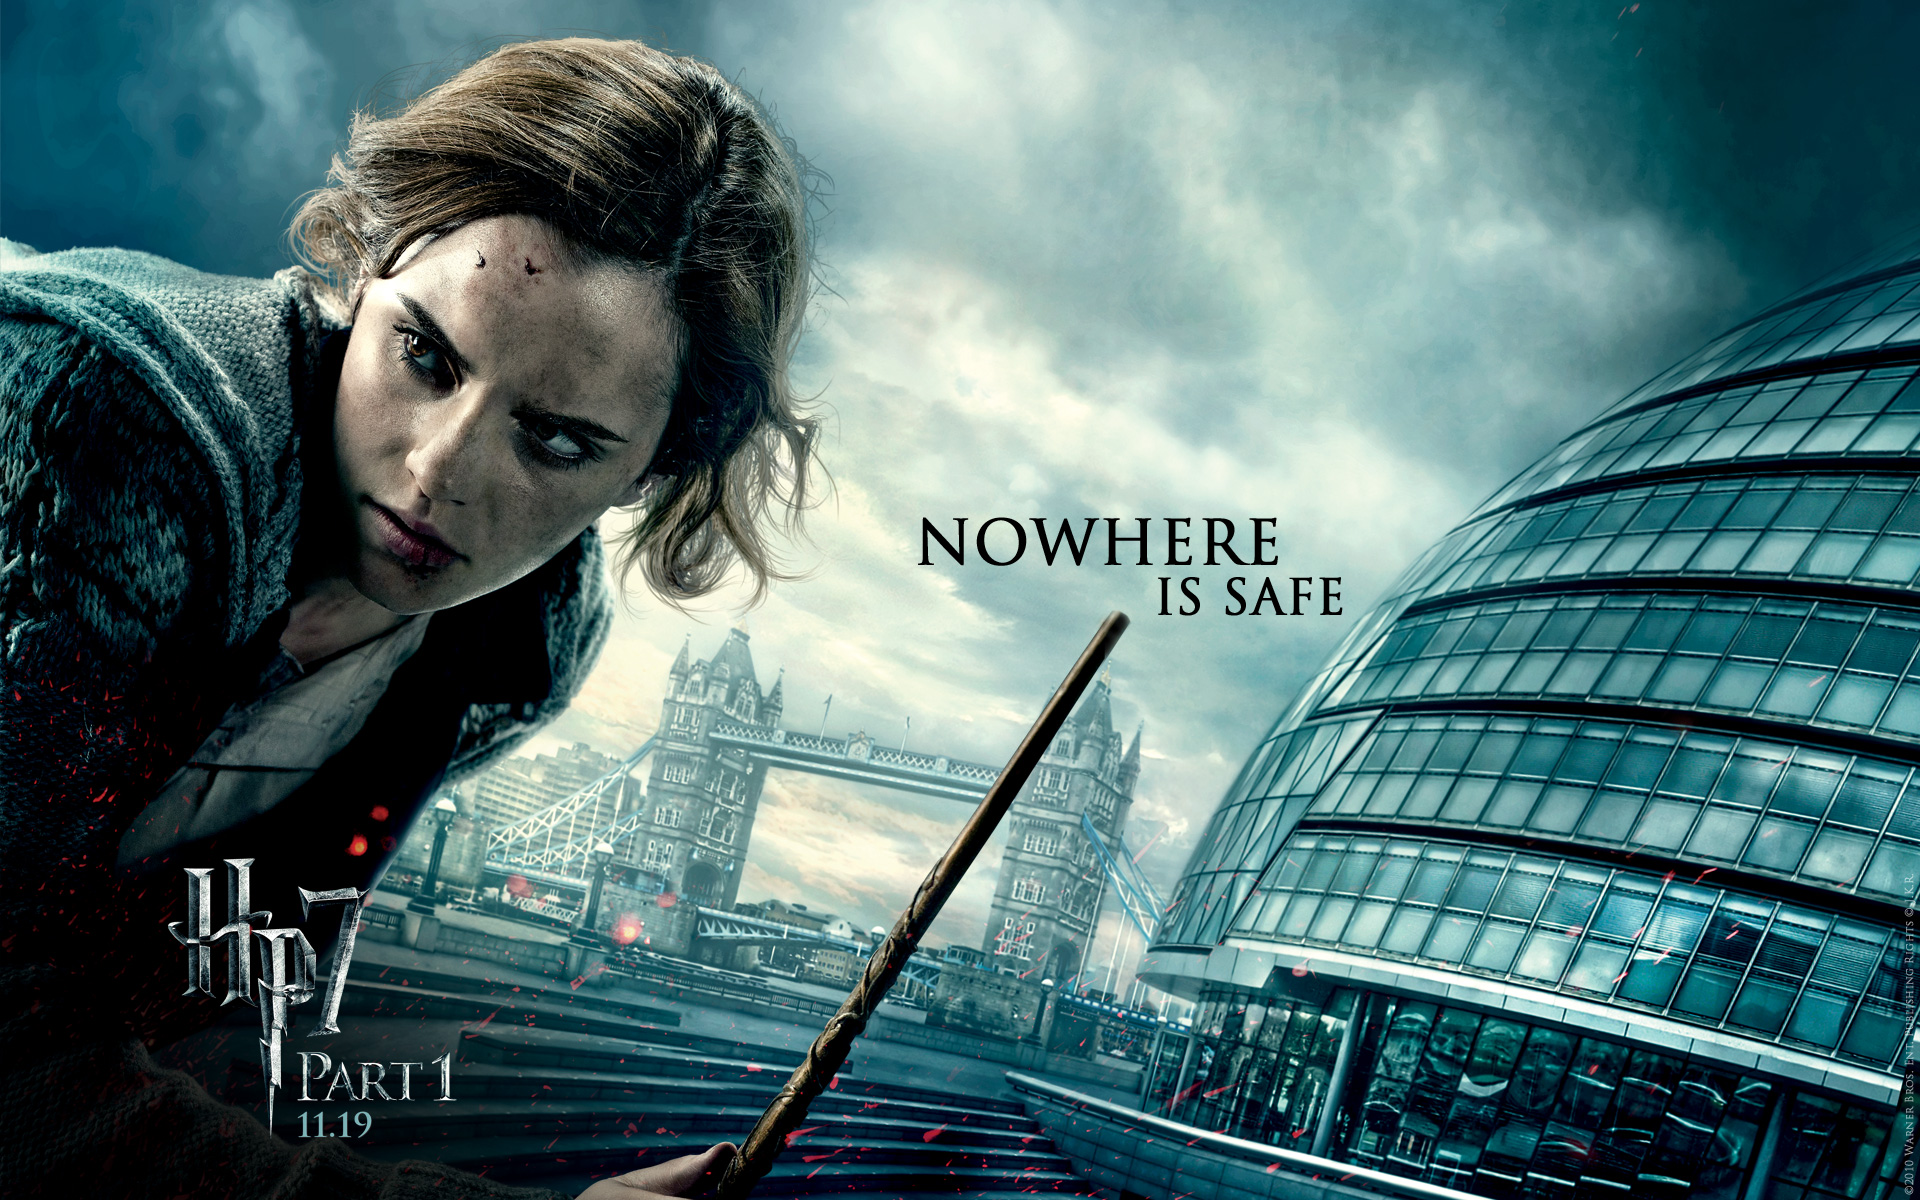 Harry Potter Harry Potter And The Deathly Hallows Hermiona Granger Emma Watson 1920x1200